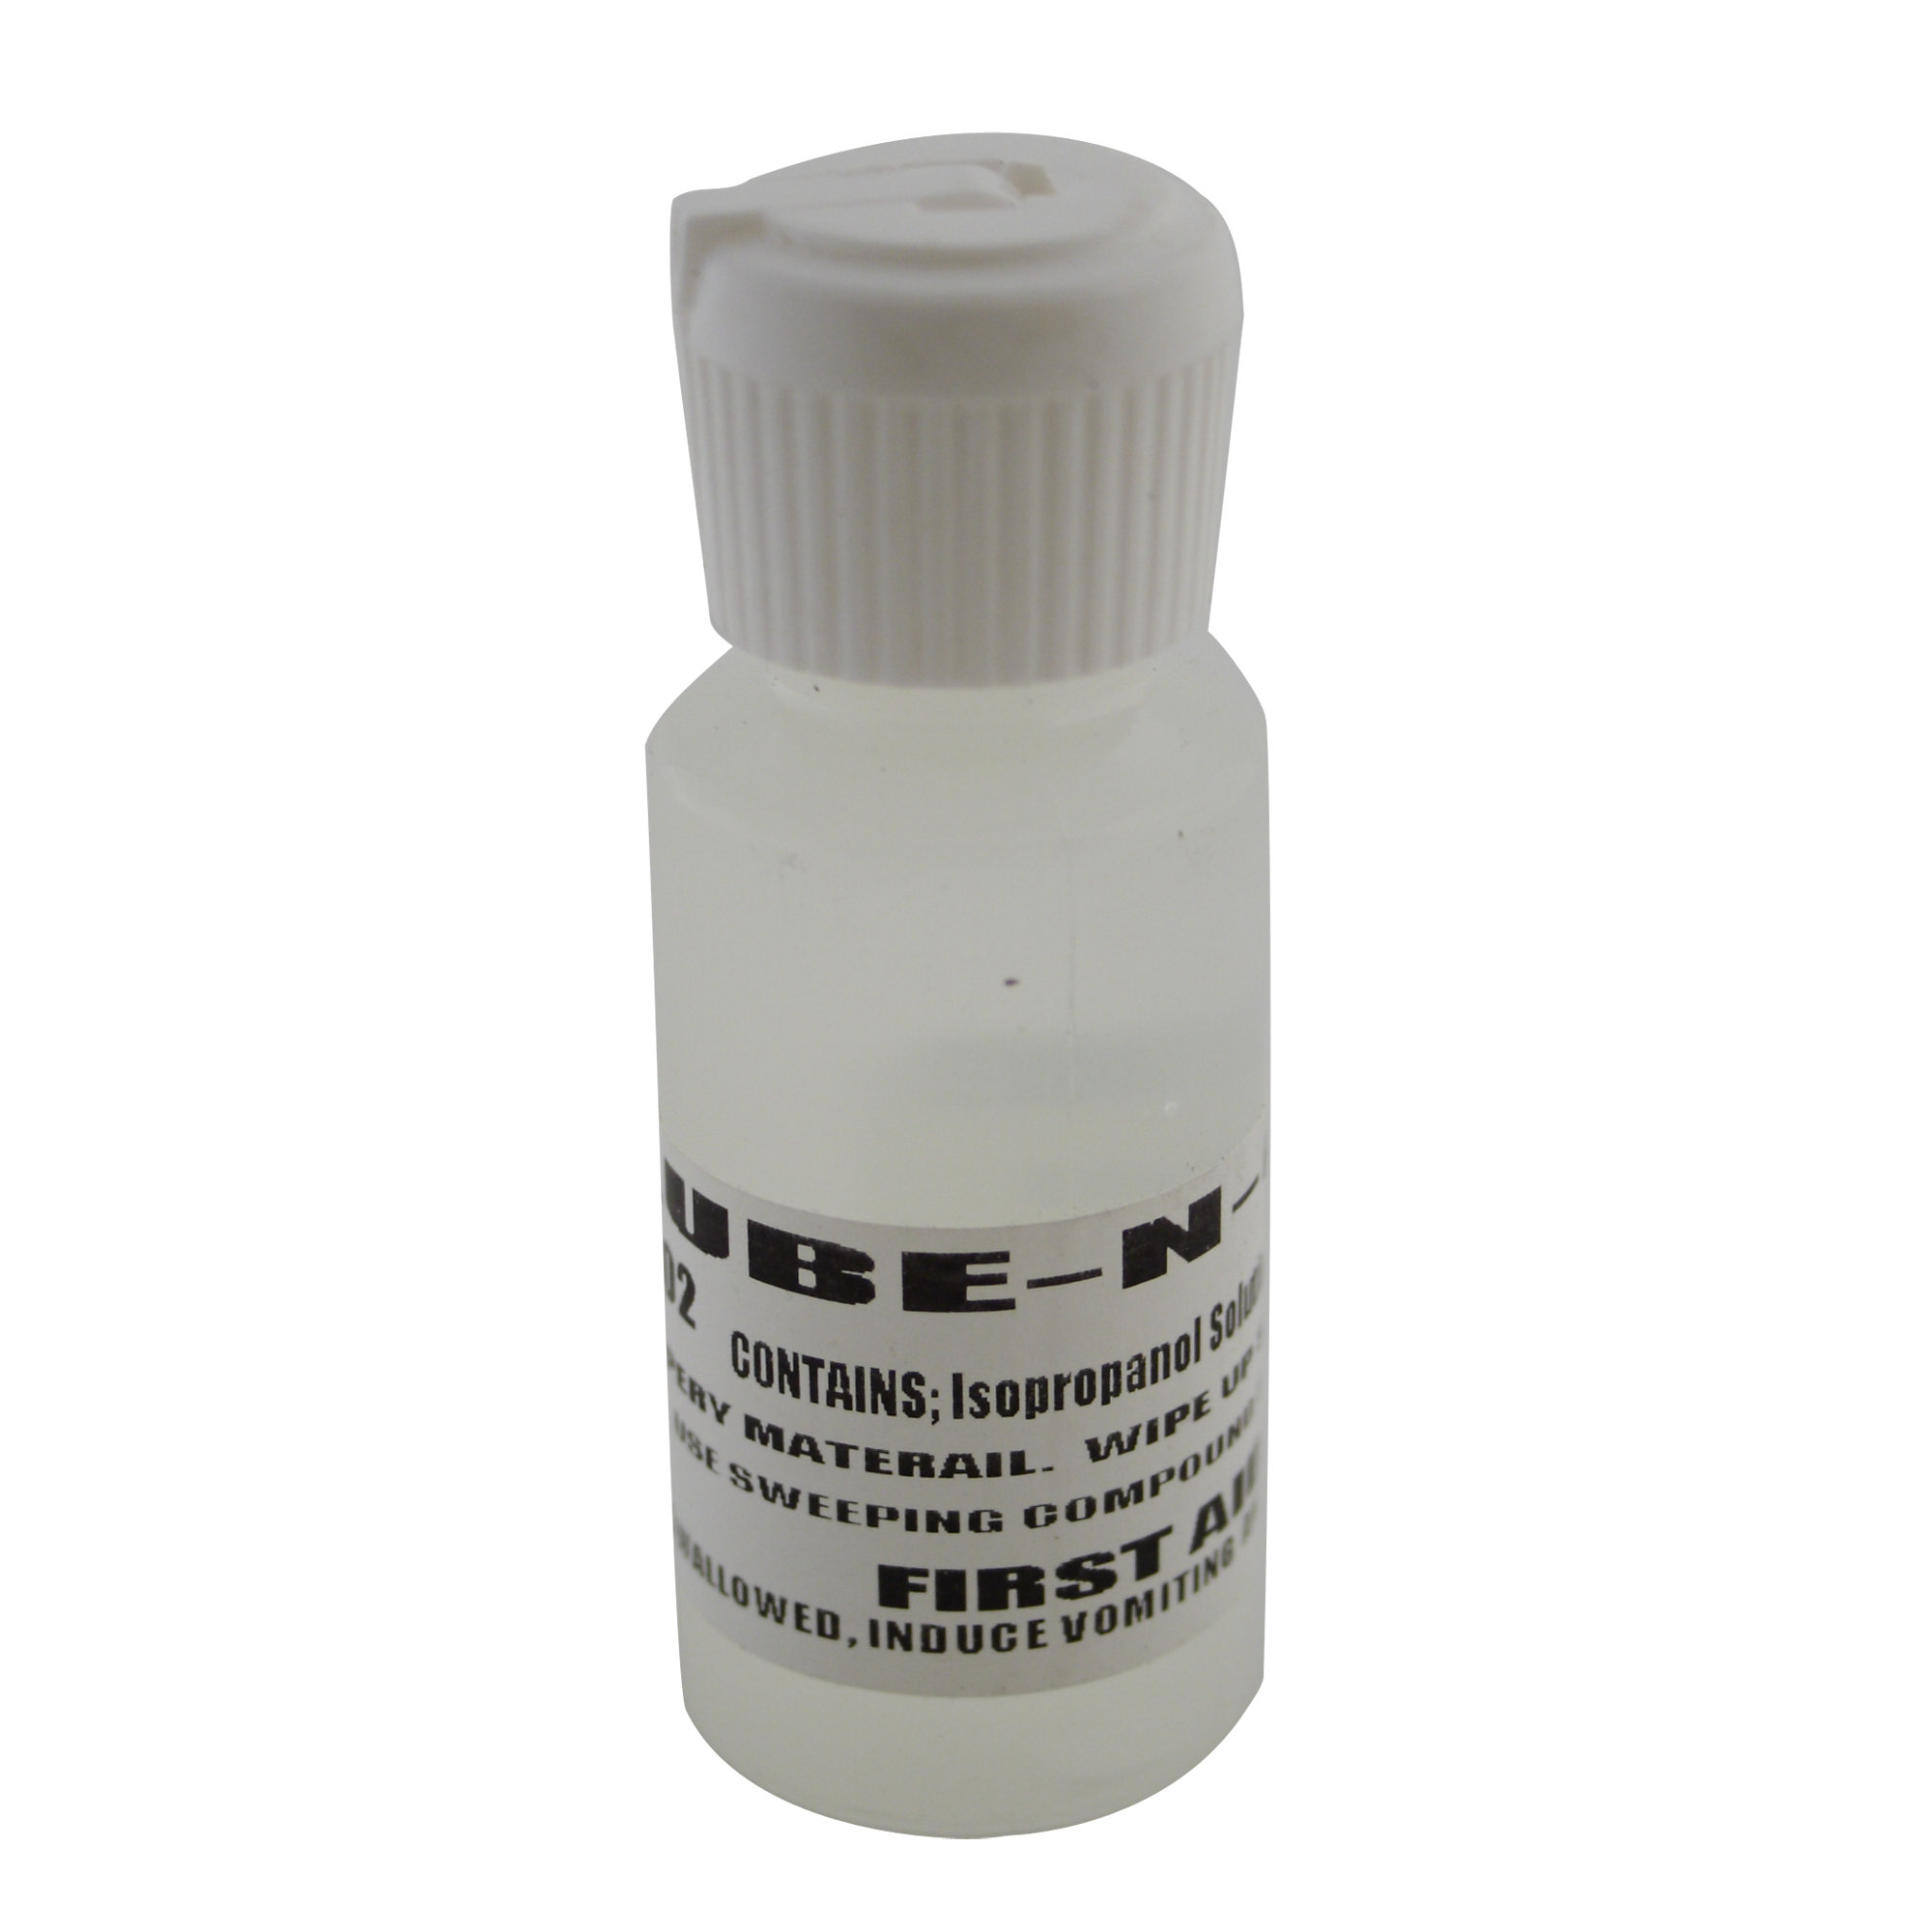 Lube and Glue for Grips, 1 oz. Bottle